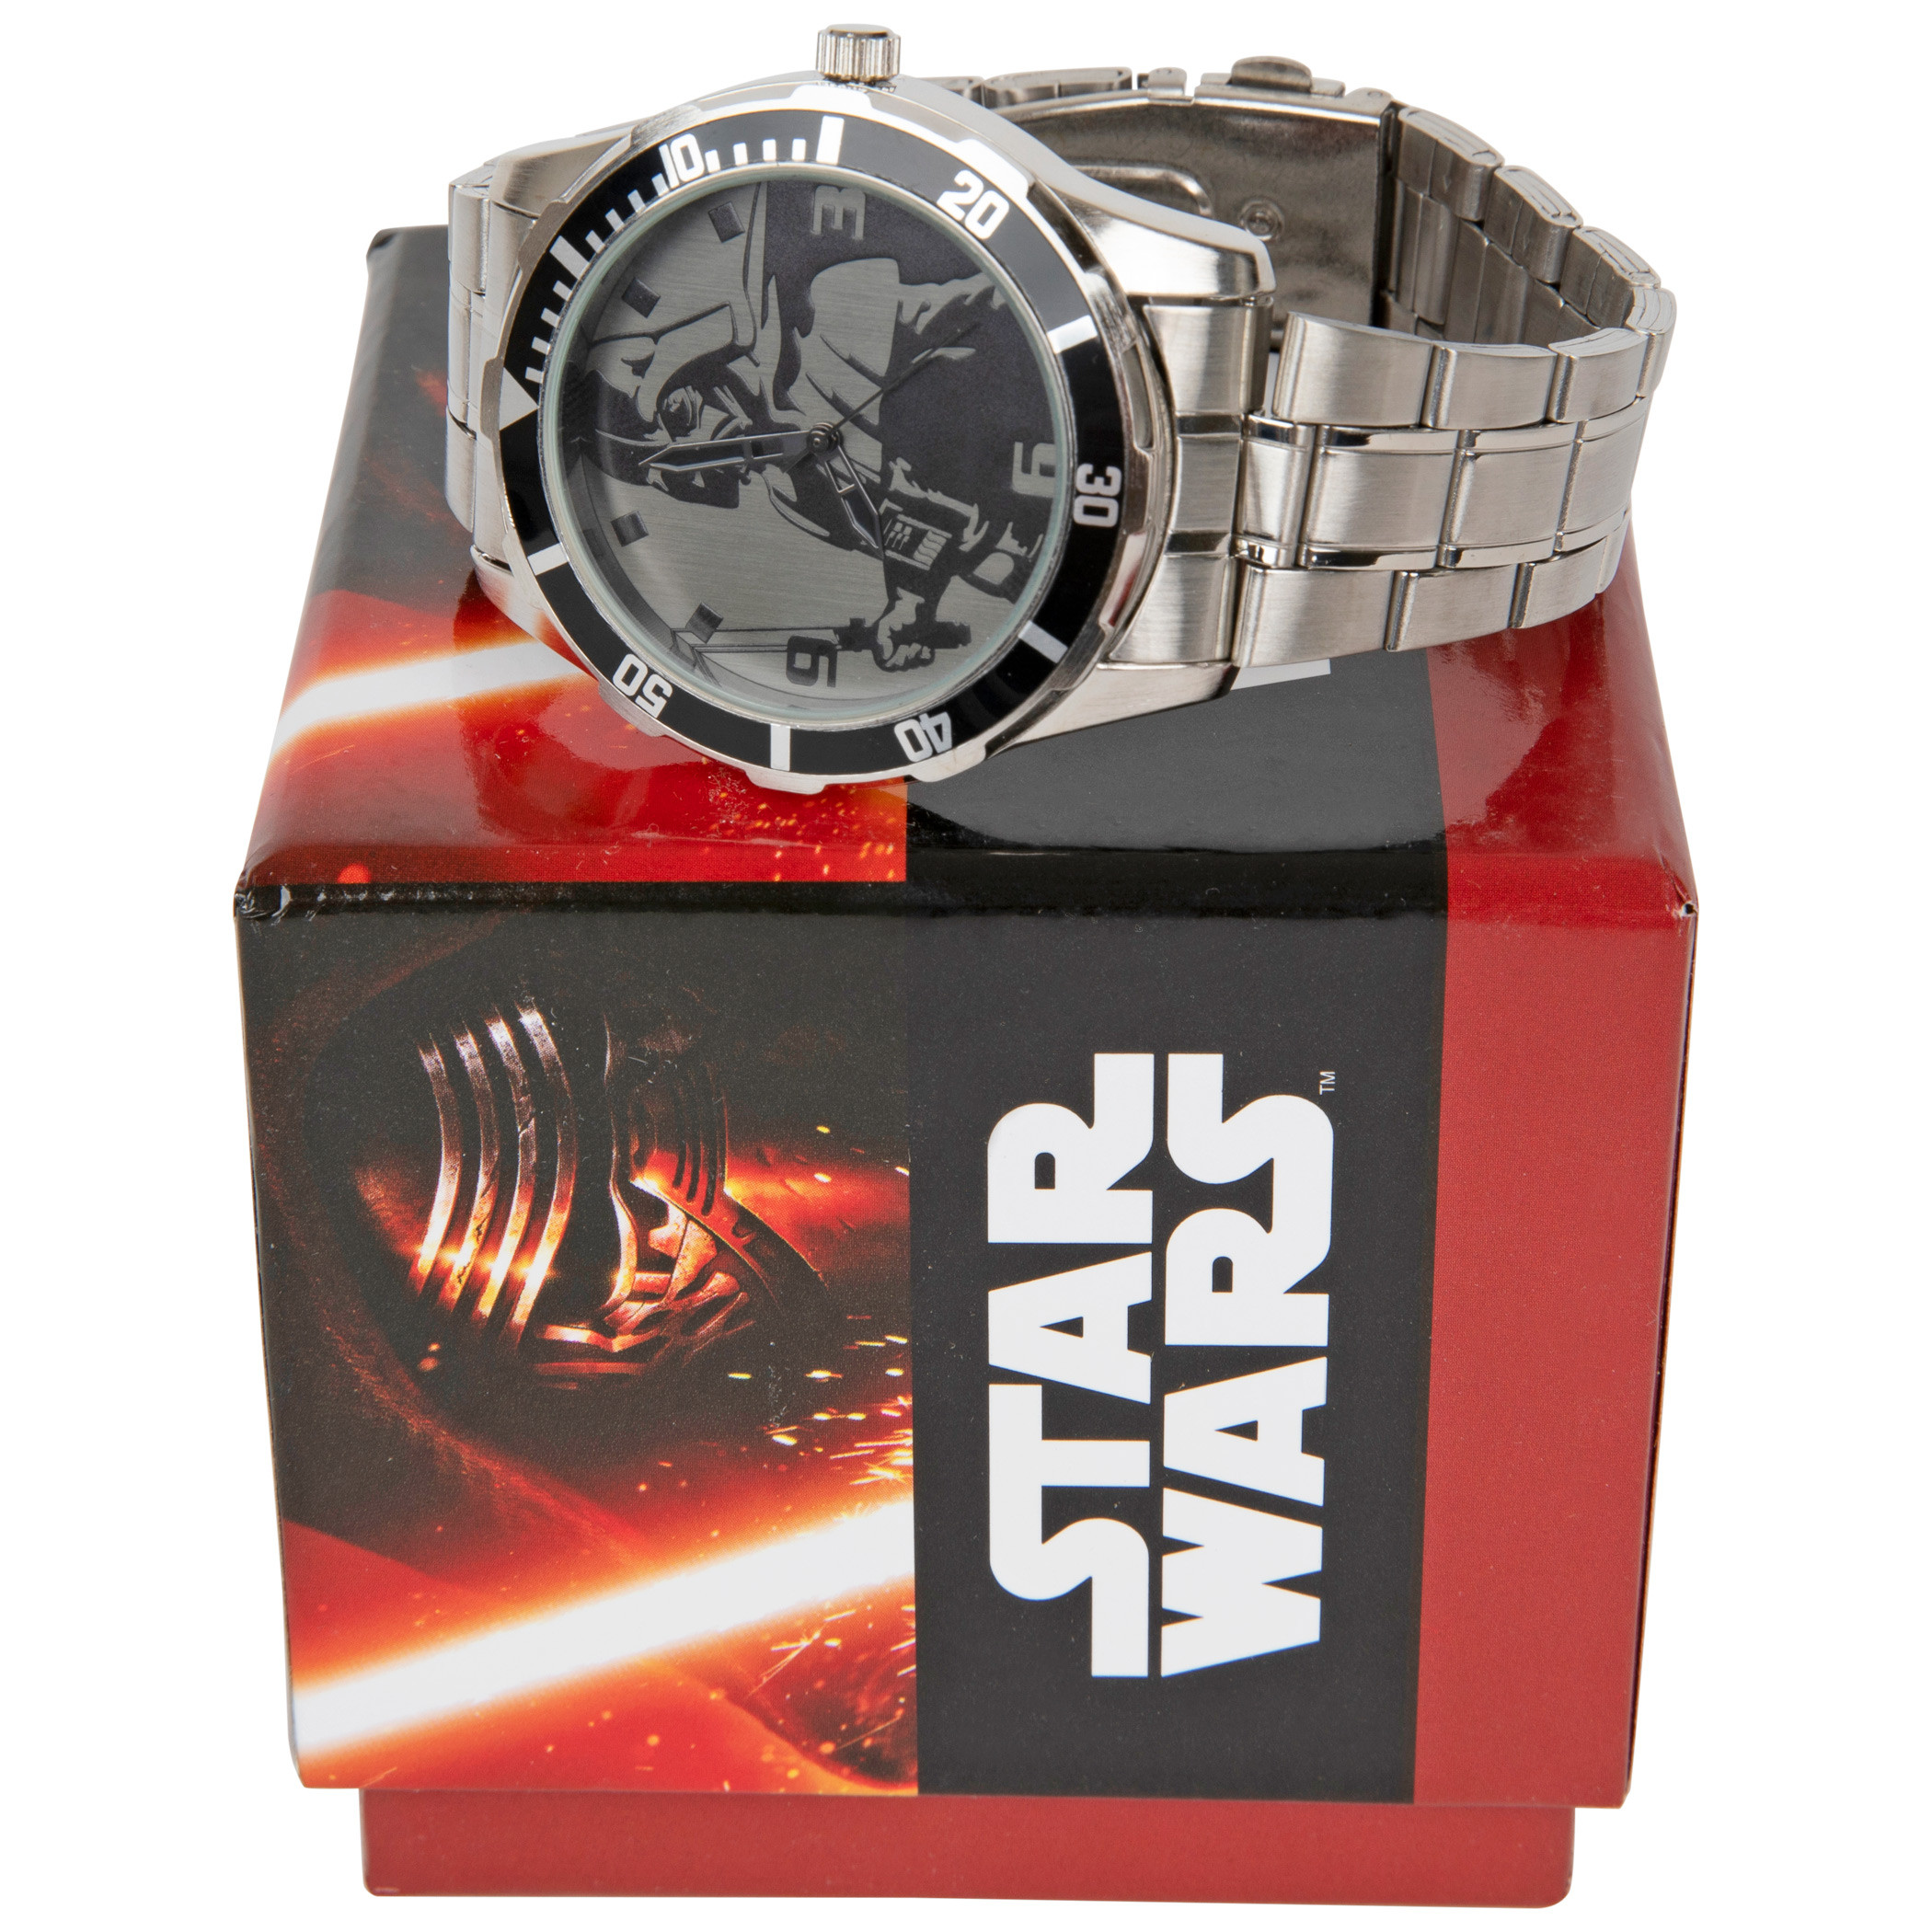 Star Wars Original Trilogy Darth Vader Watch with Stainless Metal Band